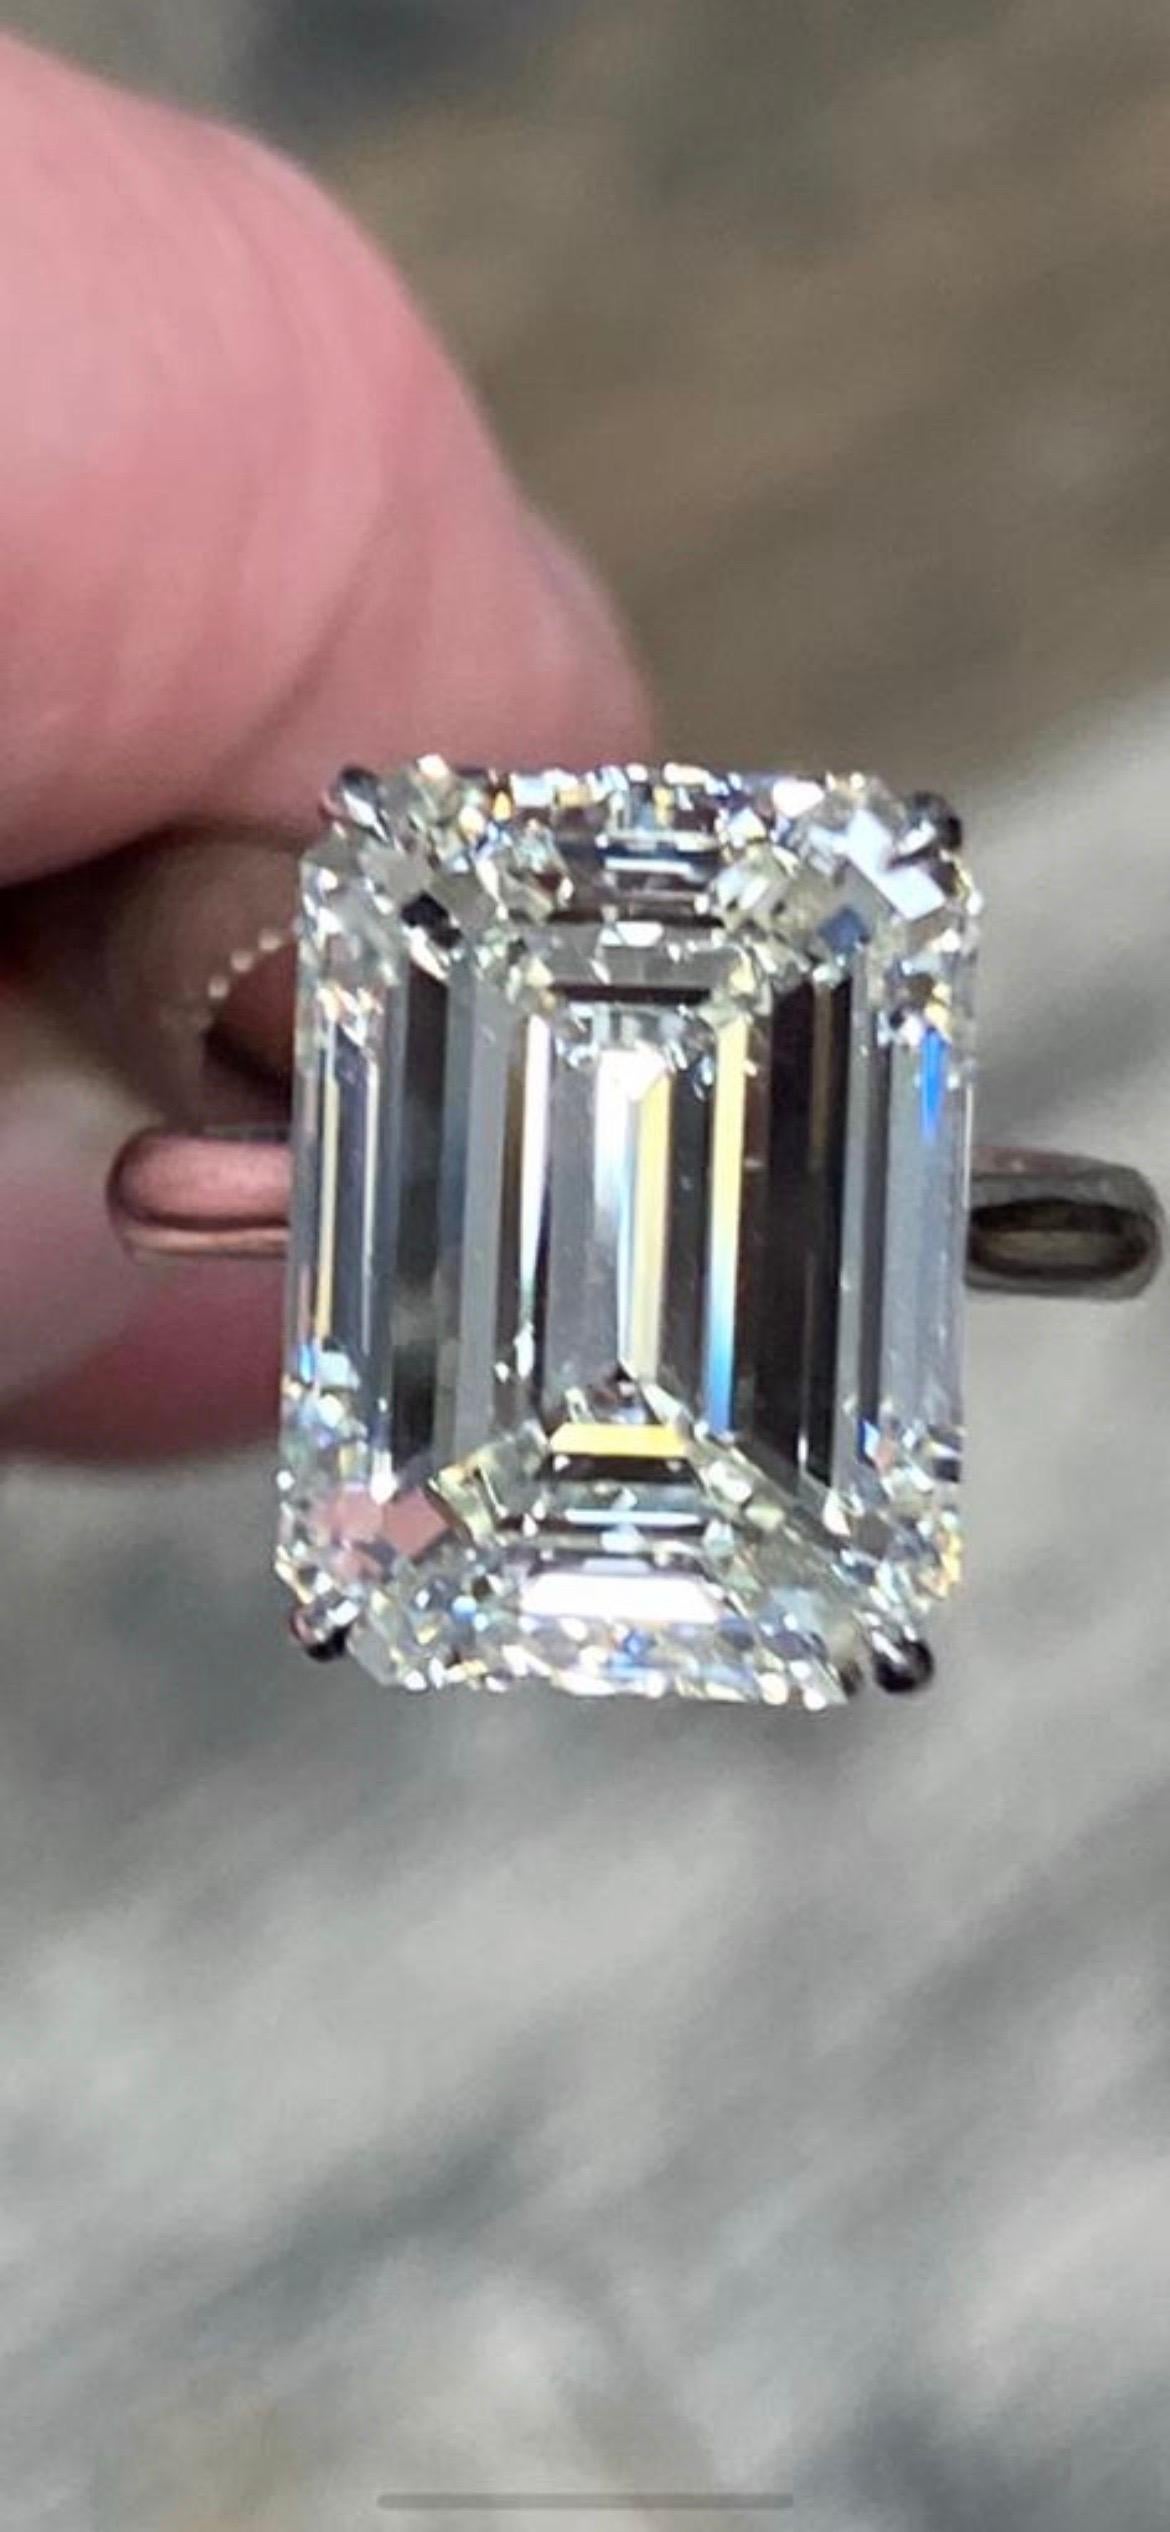  
Magnificent 5.73 Carat Emerald cut diamond ring.
“The Magic is in the Cut “
Truly a masterpiece and example of old world diamond cutting and shaping!
This beautifully cut gem is exceptional in its perfect facet pattern and amazing length to width